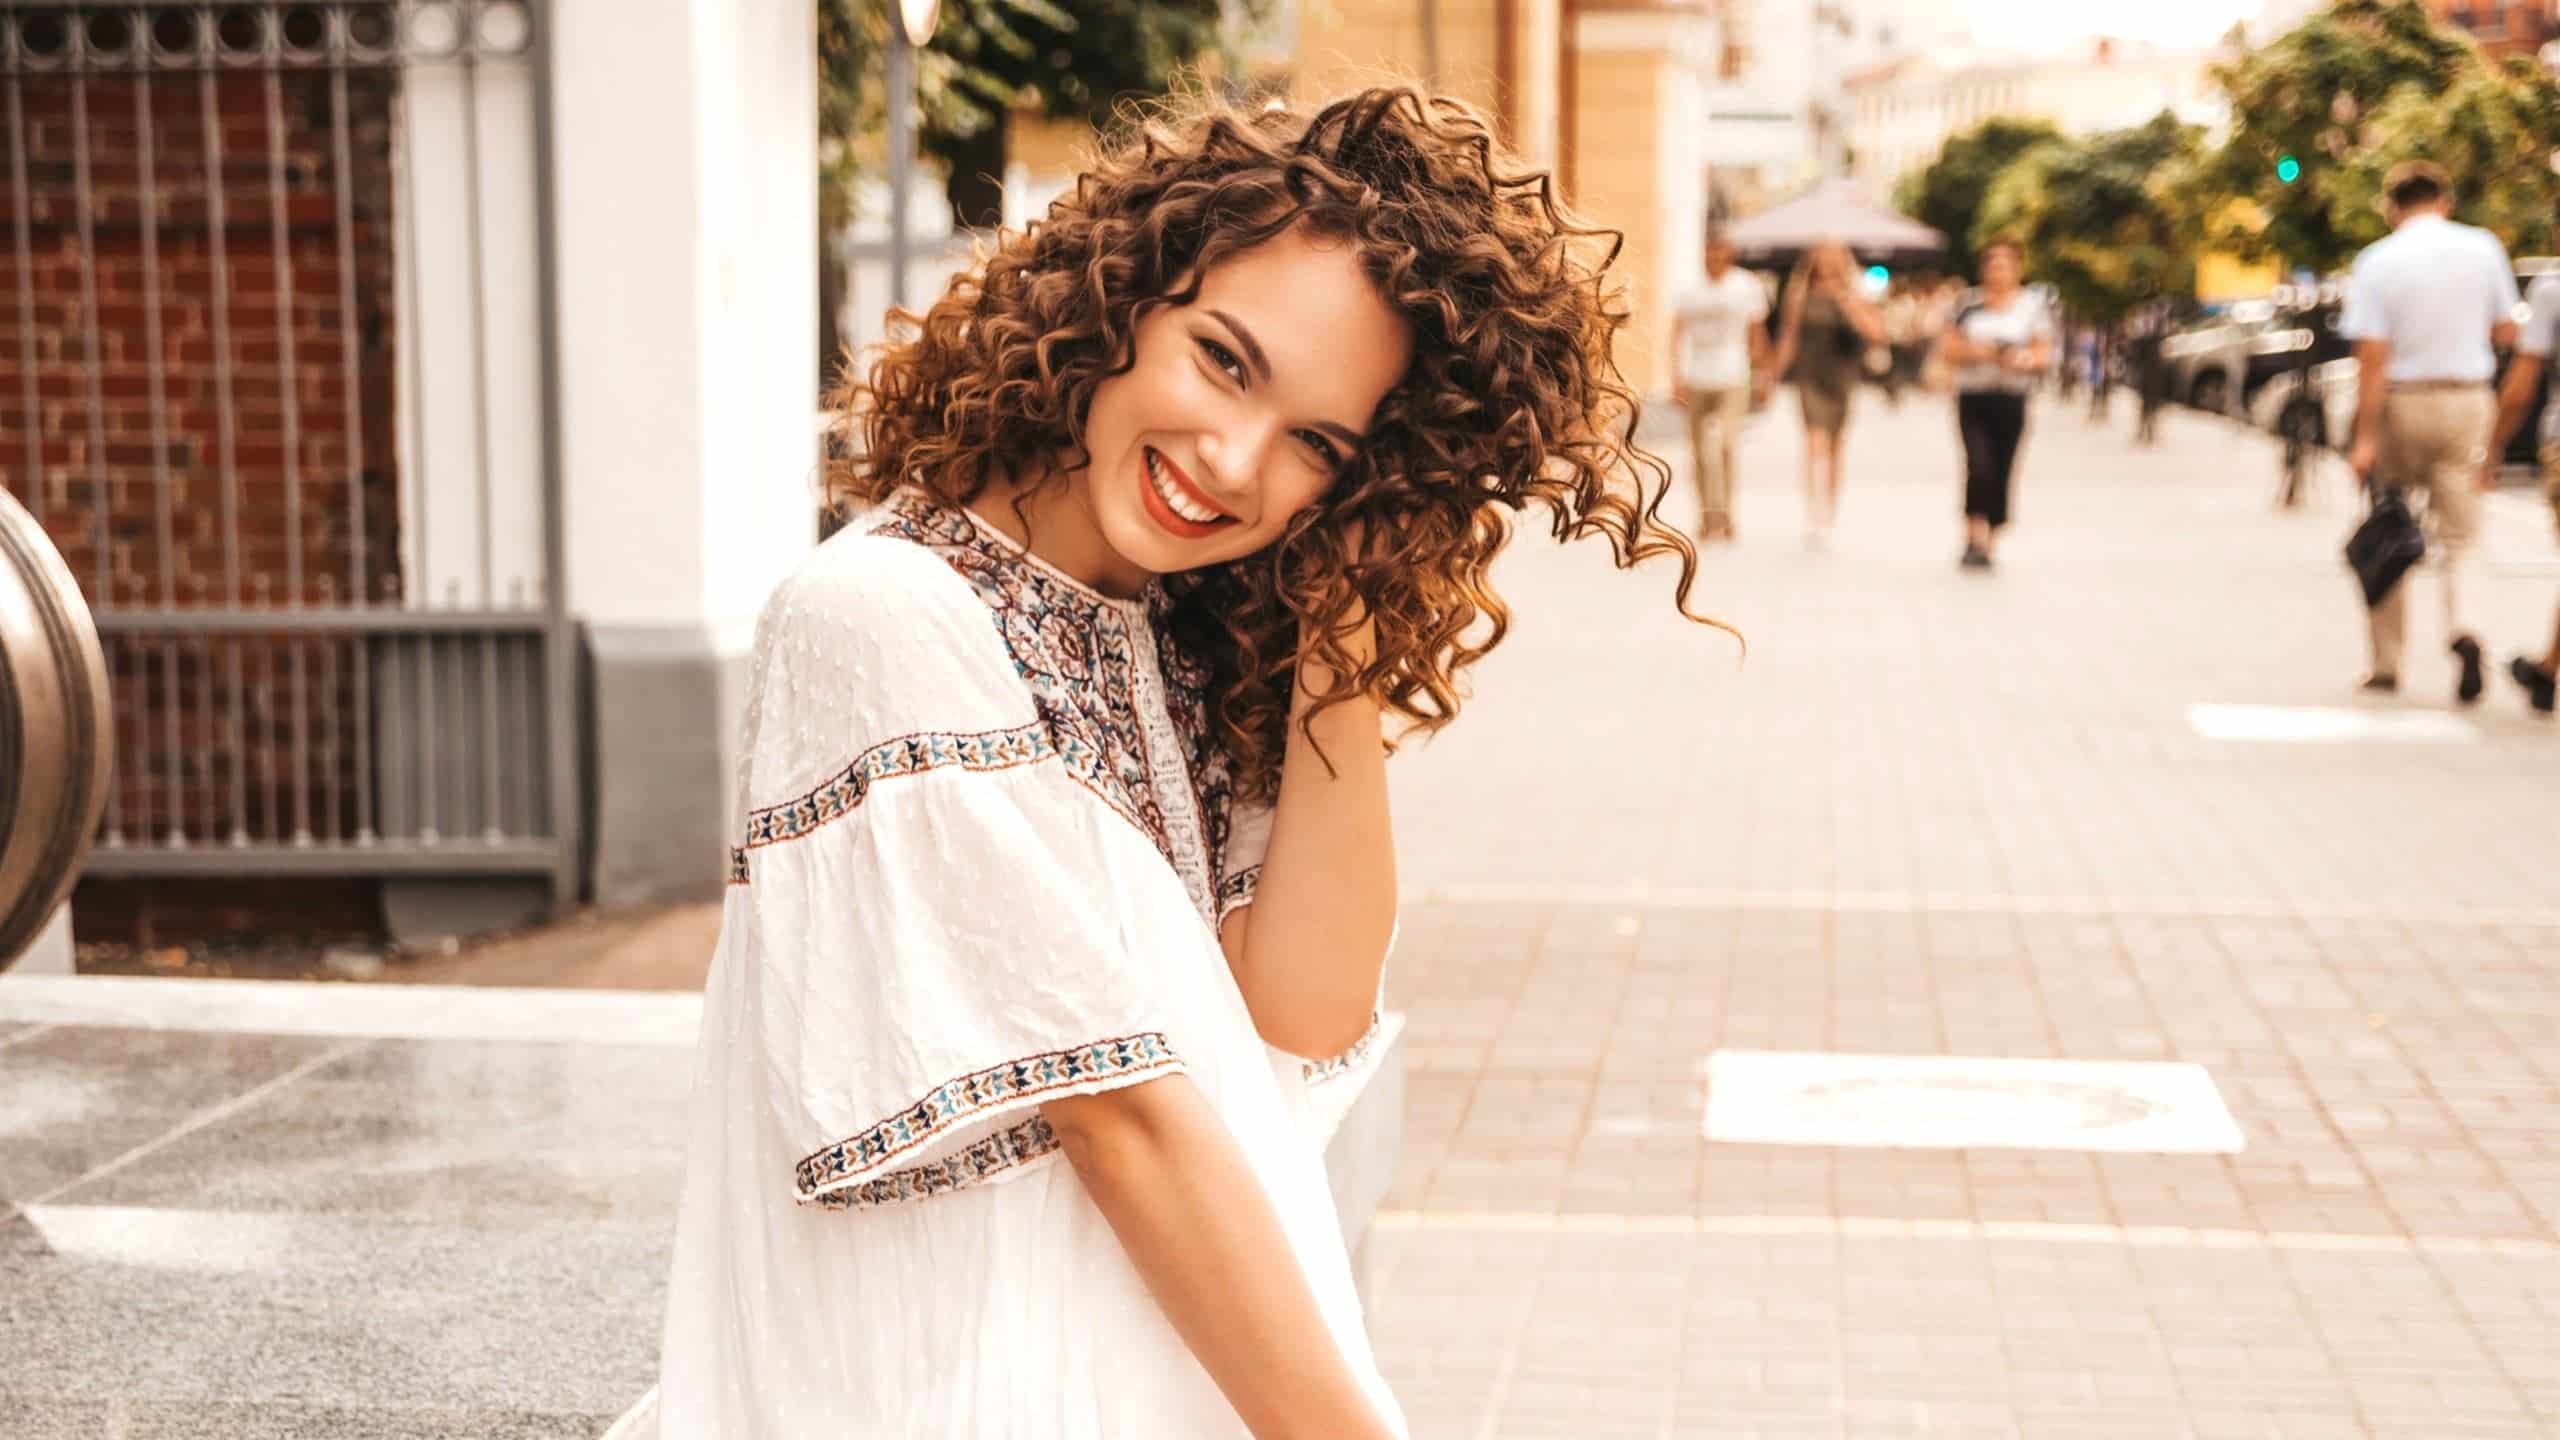 A cute curly-haired girl is smiling.